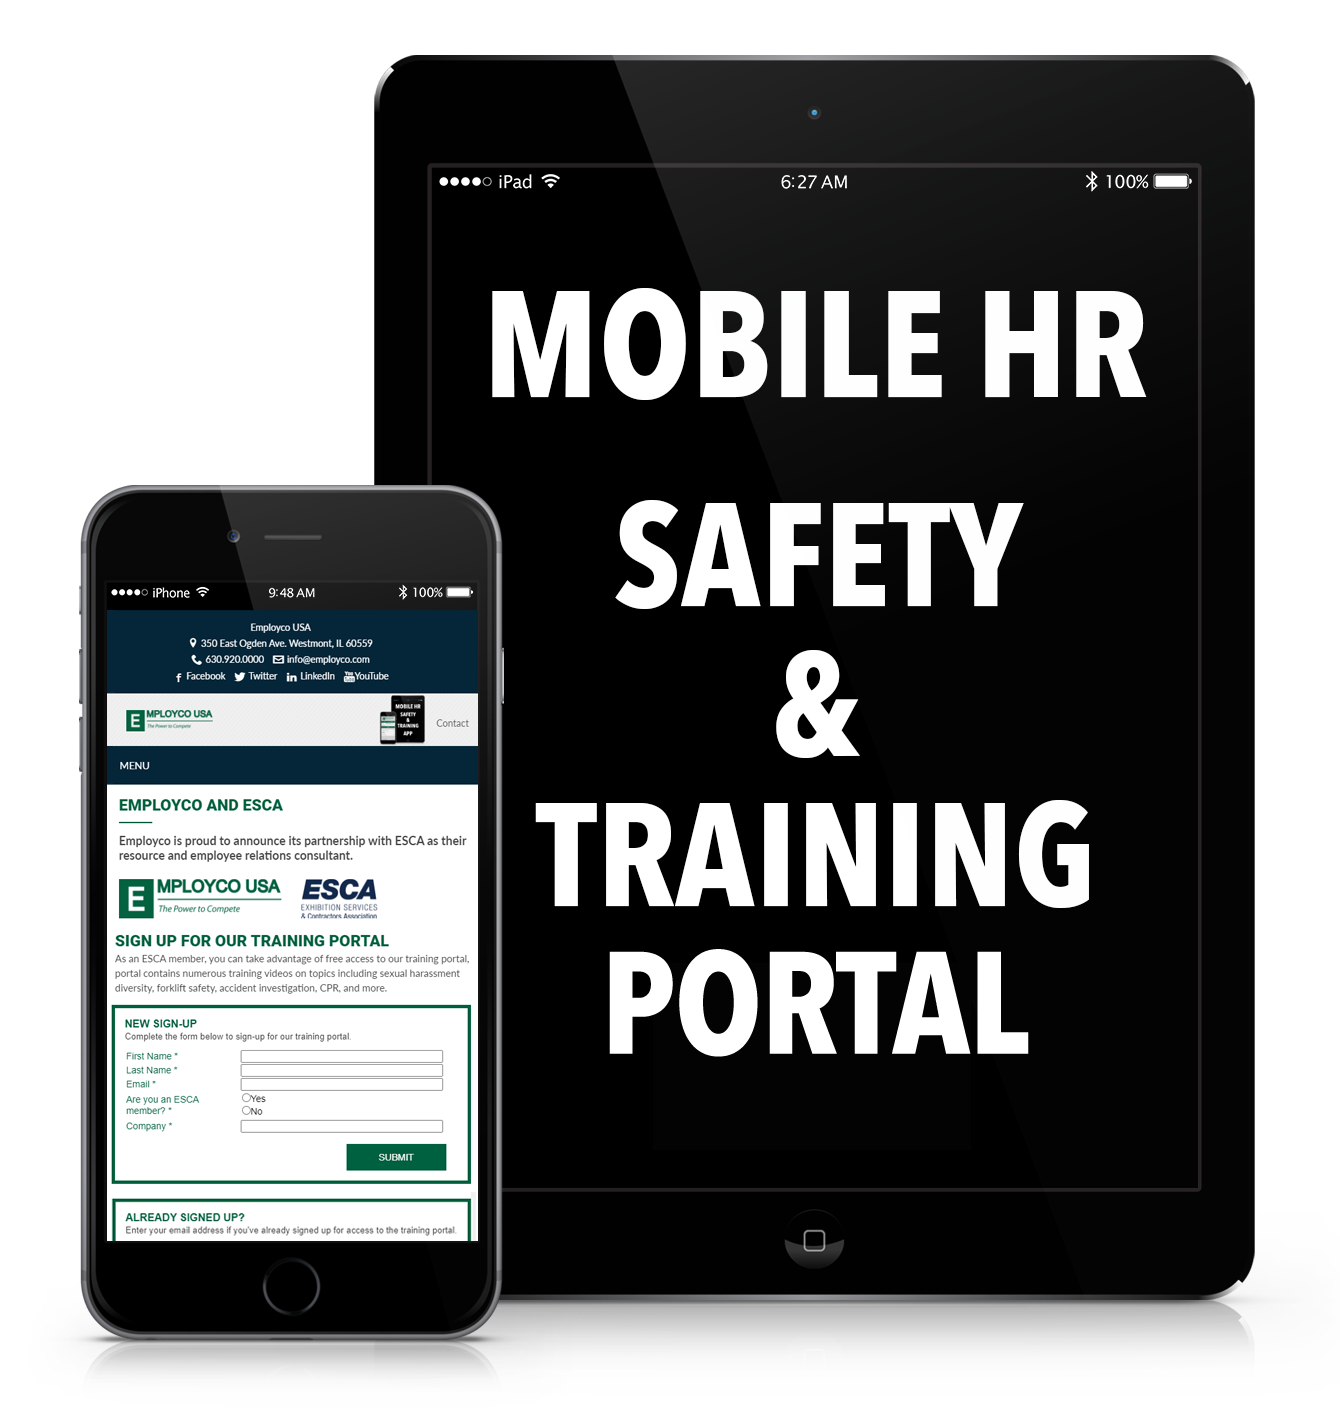 Mobile device training link.